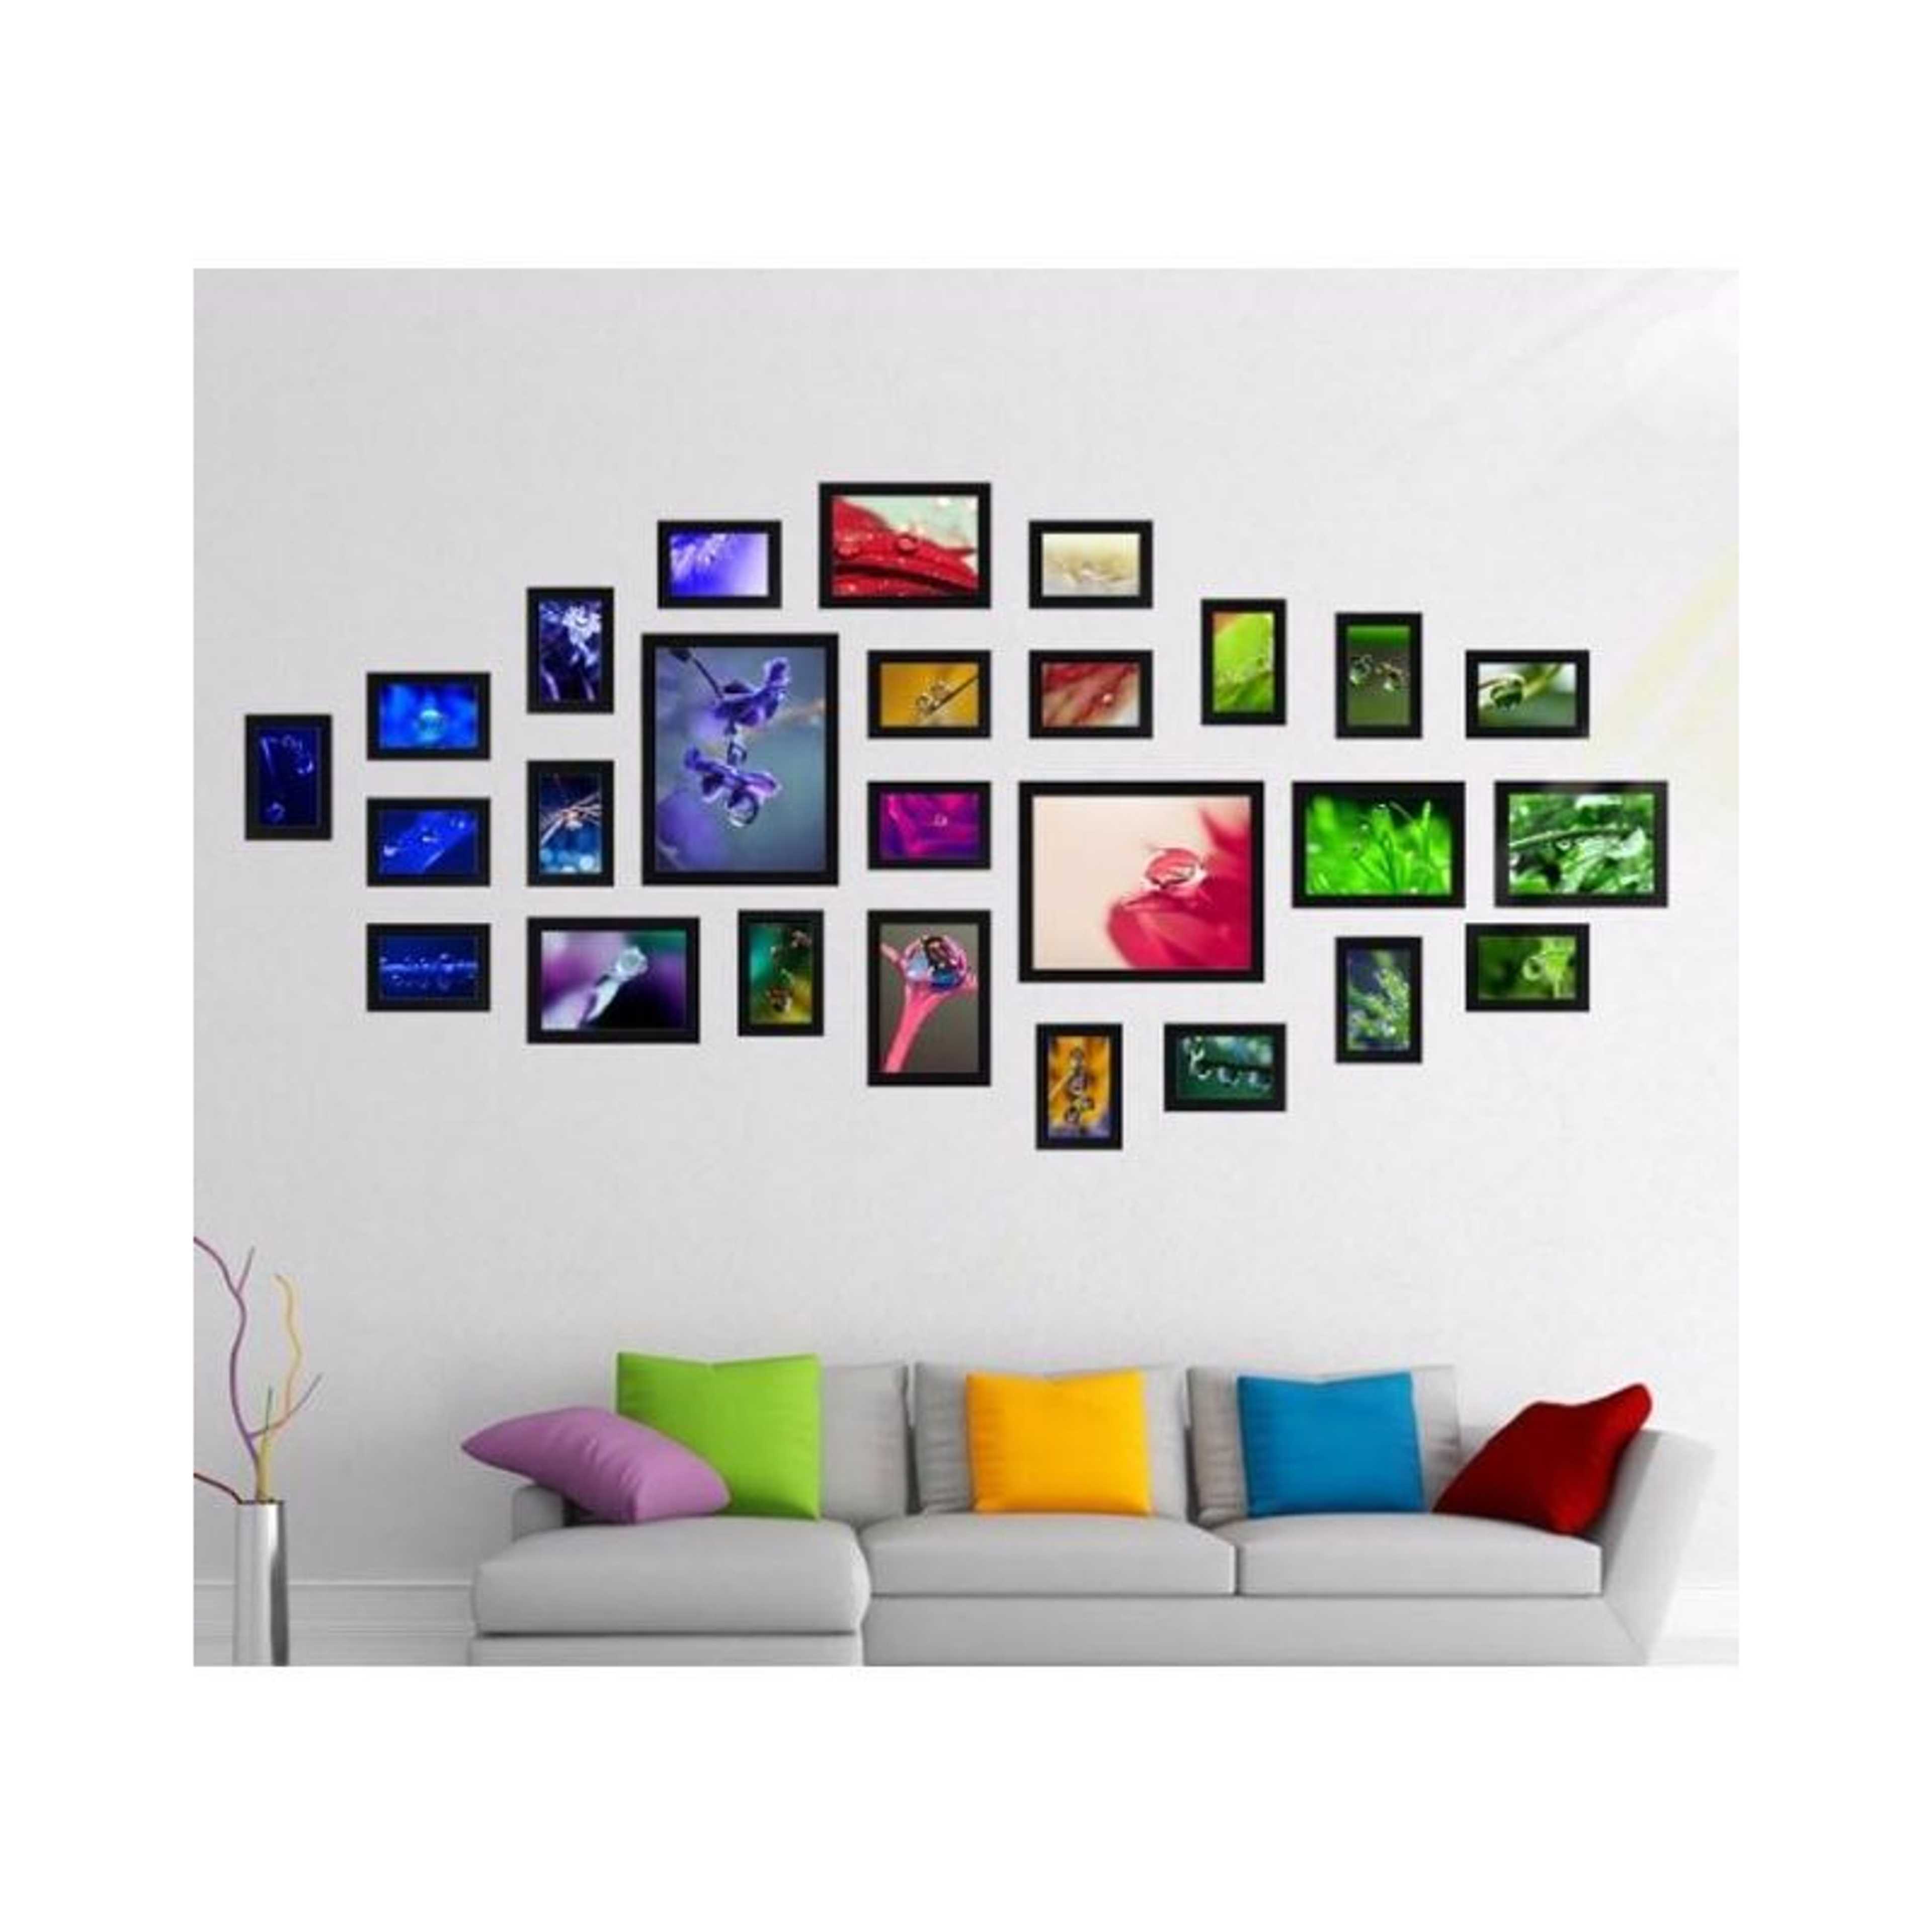 Set of 26 - Photo Frames Collage Wall Hanging Wall Decor Set